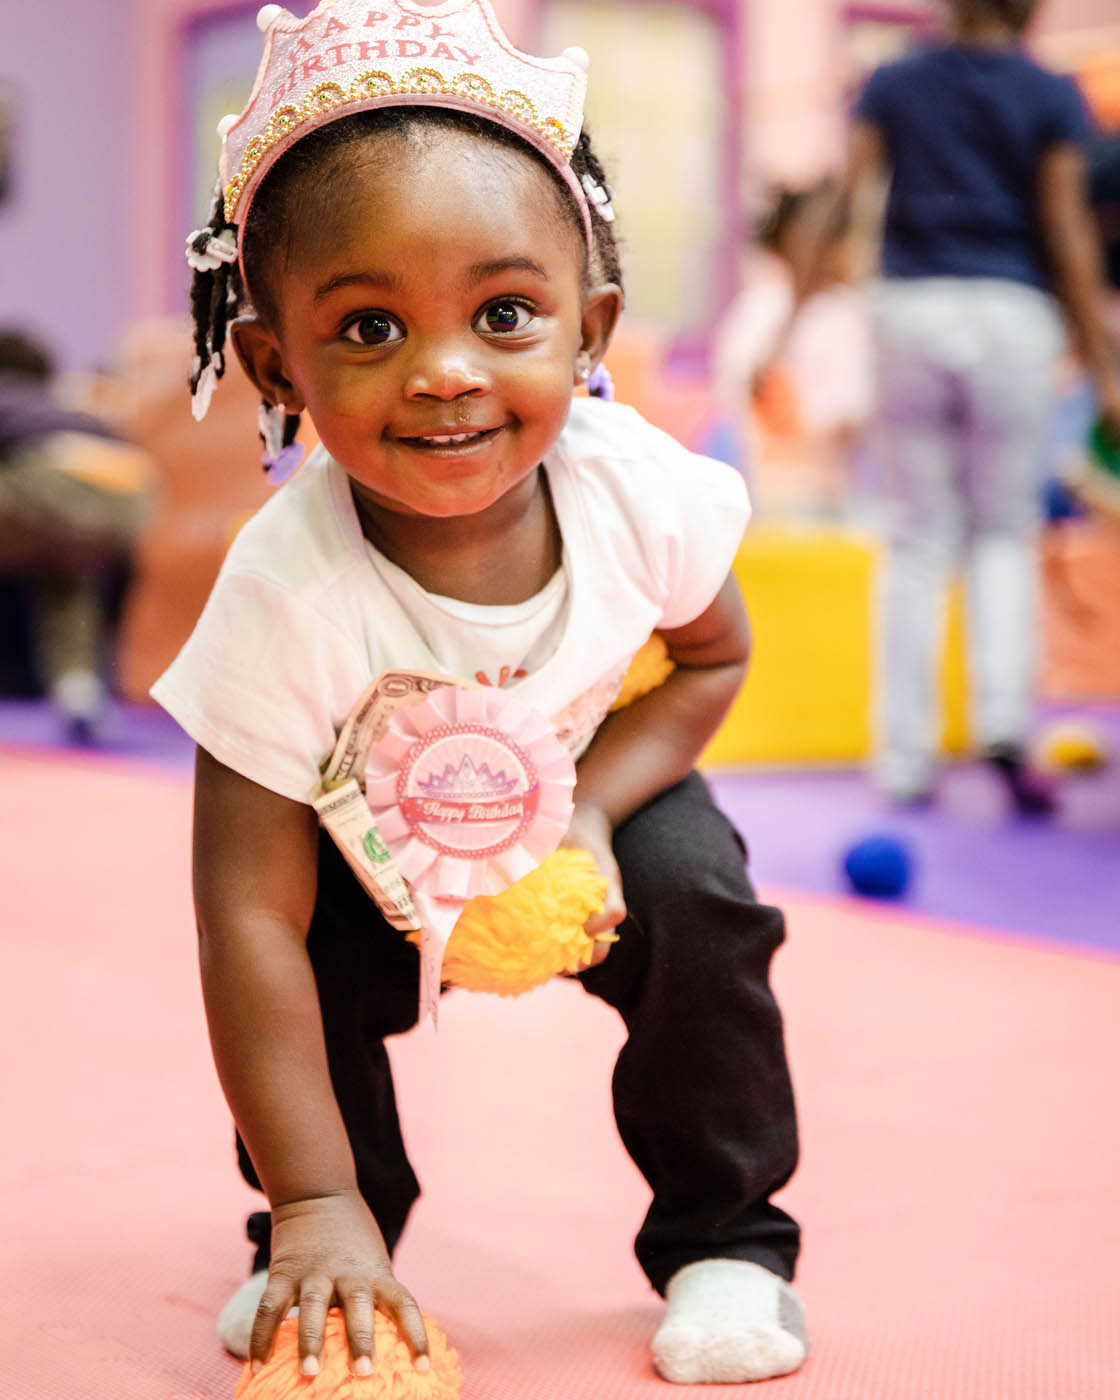 A toddler in a white shirt smiling at the camera, contact us today for toddler activities in Raleigh.